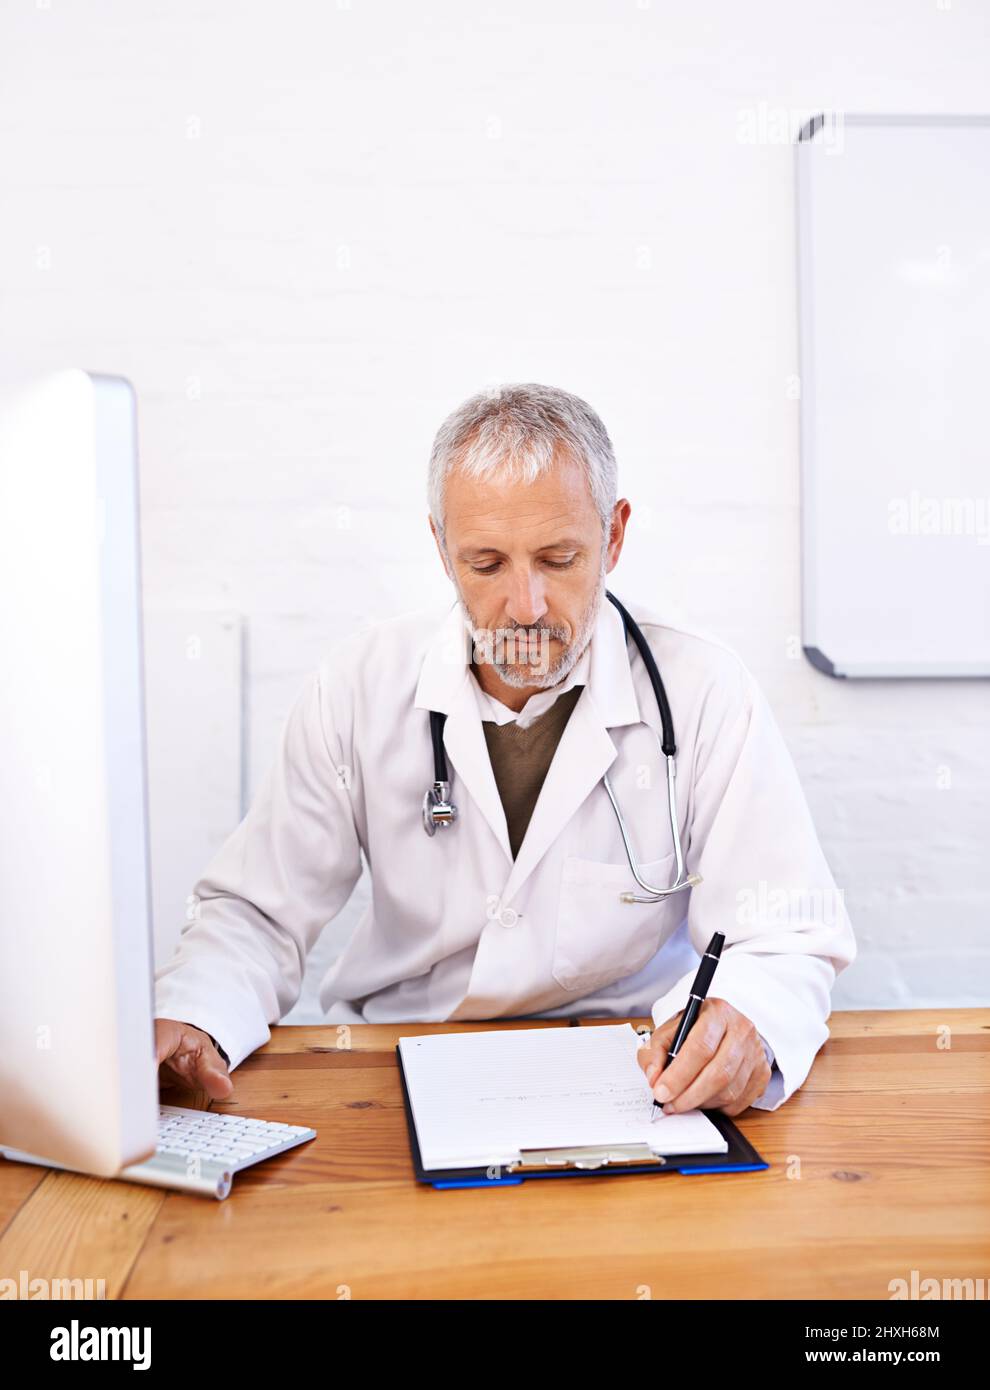 Researching treatment options online. Shot of a mature male doctor working at a desktop computer in his office. Stock Photo